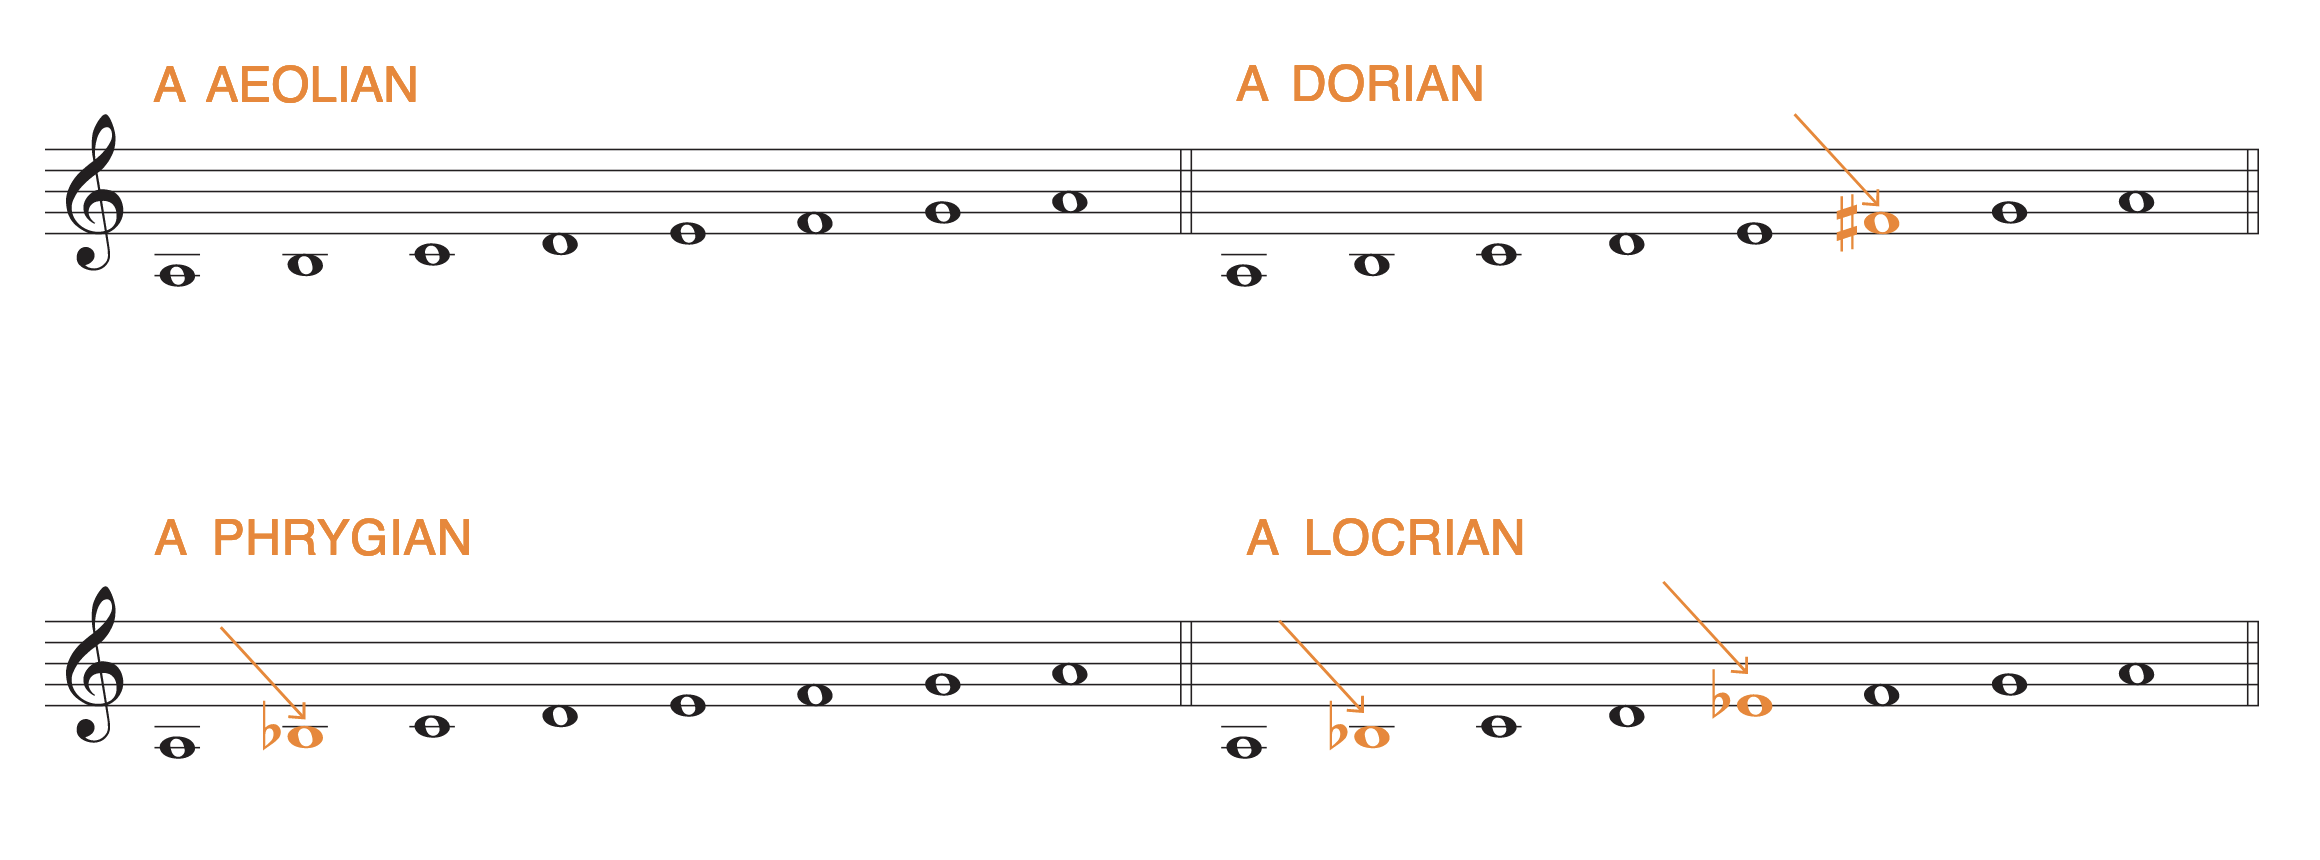 The following contrasts the Aeolian scale with the other three minor modes: Dorian, Phrygian, and Locrian.